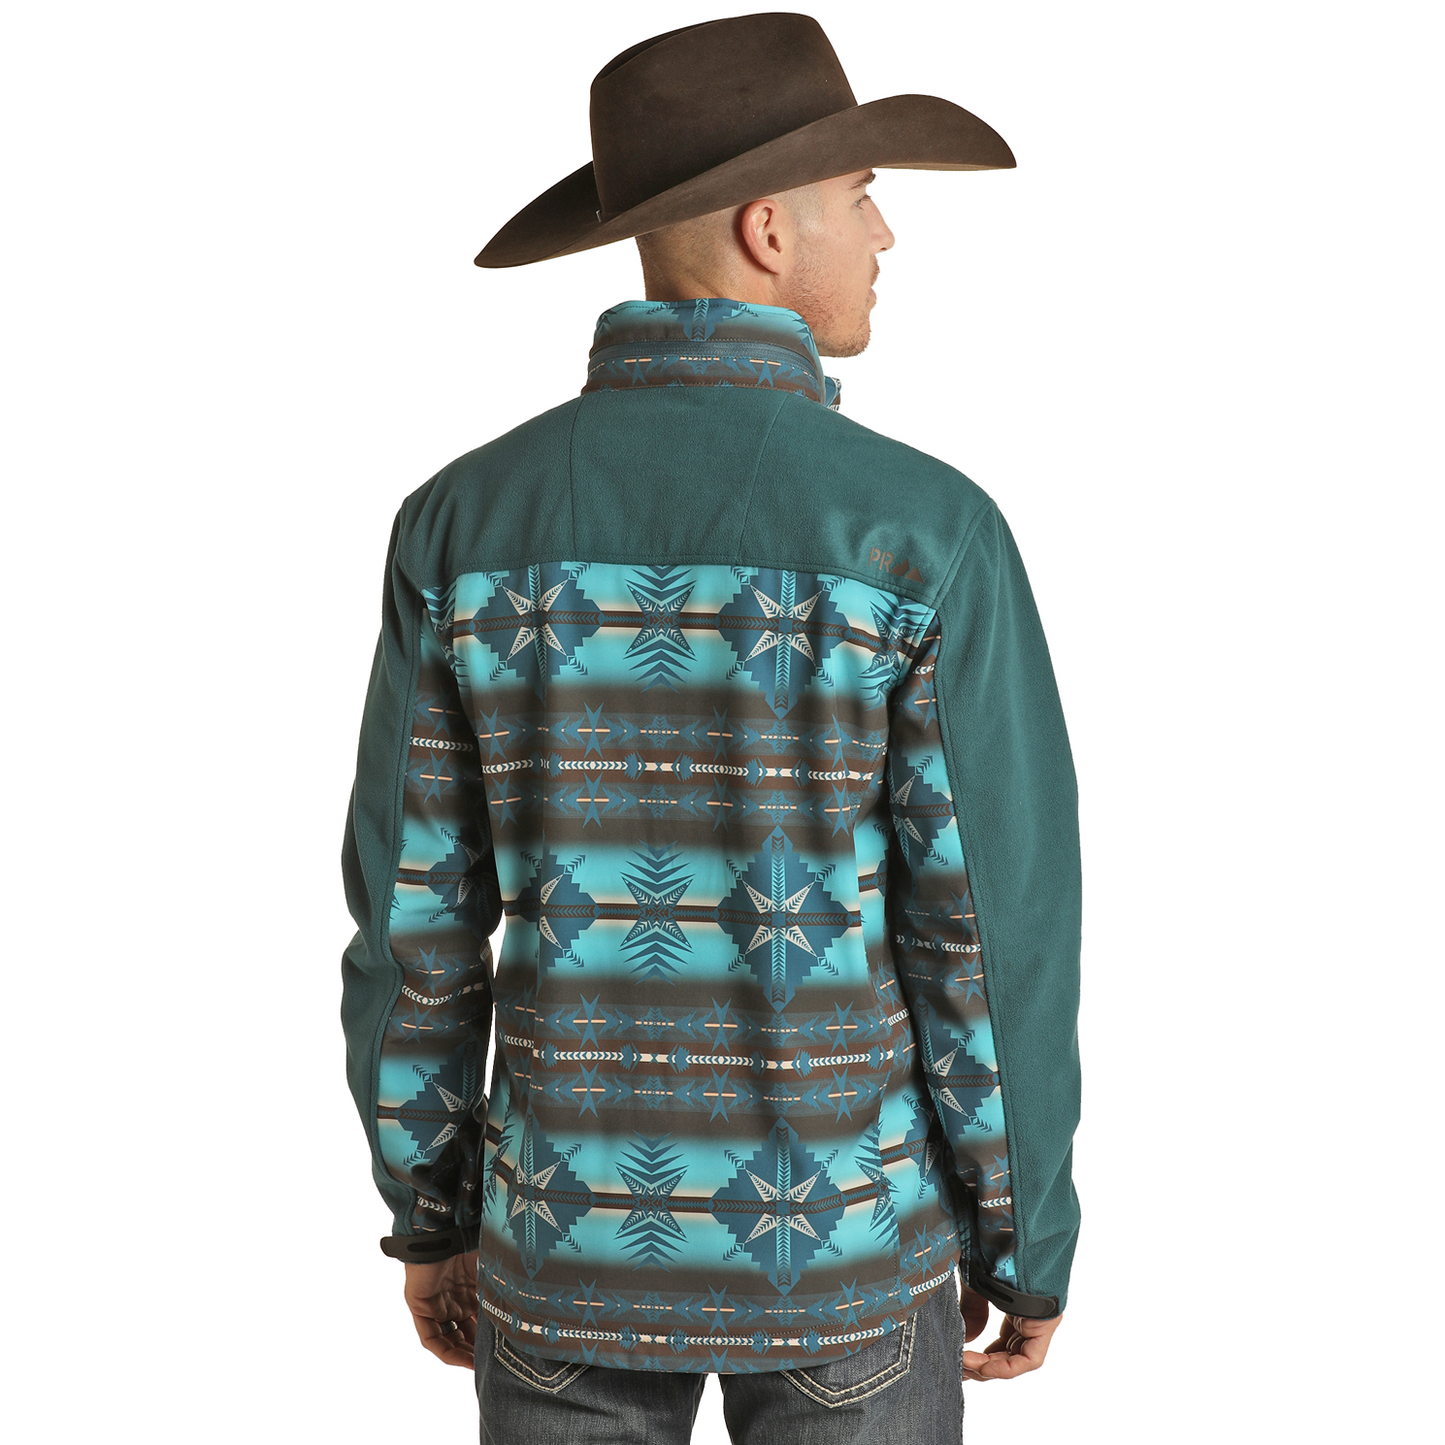 Powder River Outfitters Men's Printed Aztec Peacock Jacket PRMO92RZY6-84